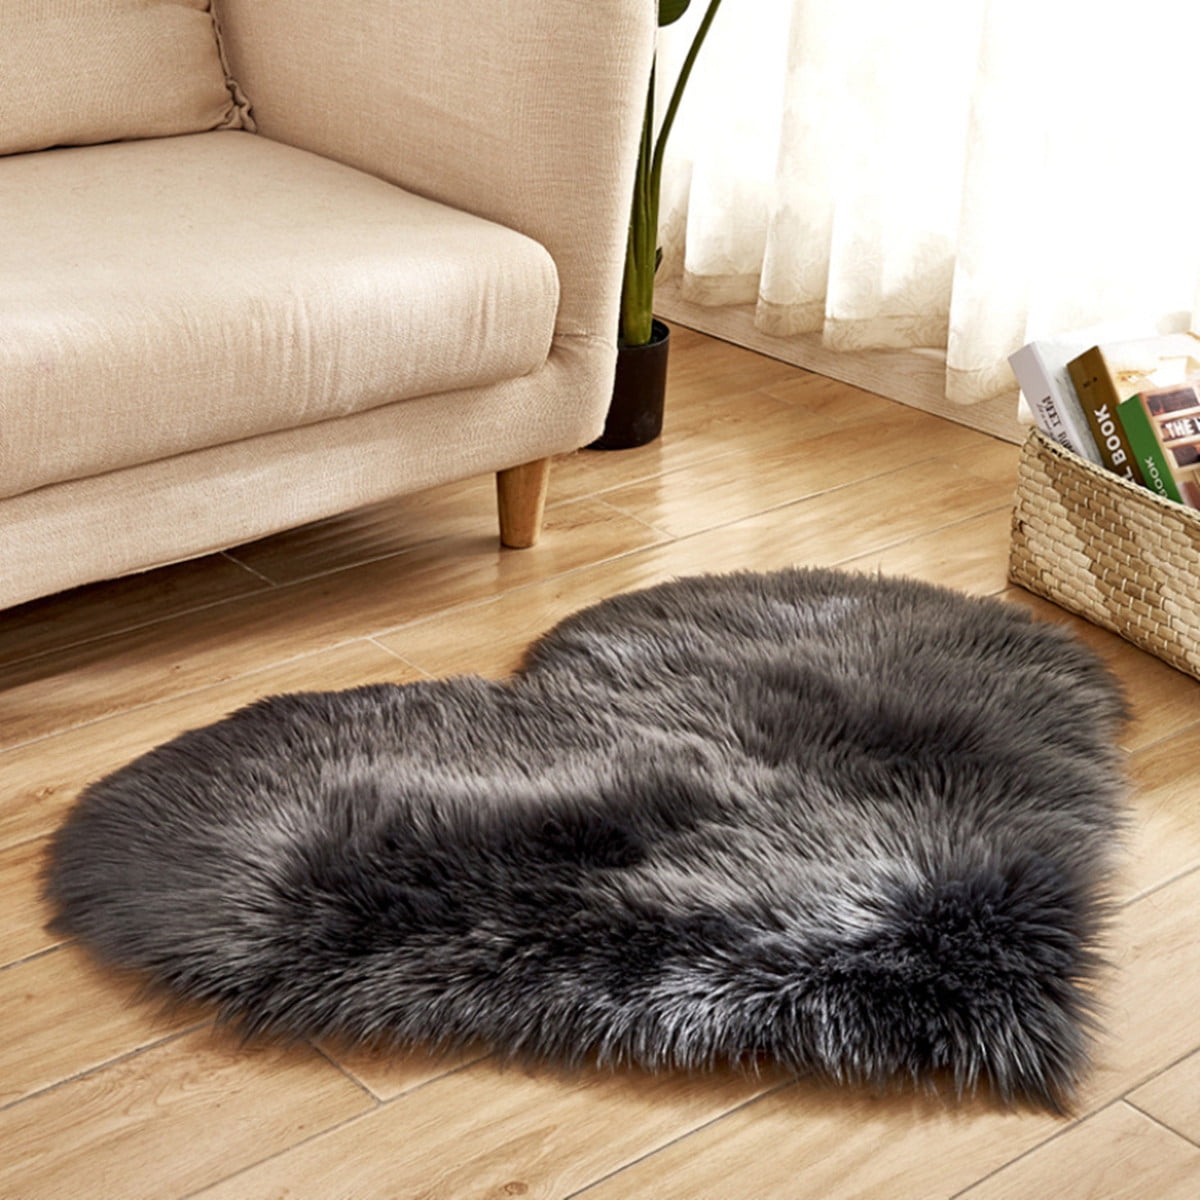 Soft Faux Sheepskin Rug Plush Carpets Fluffy Shaggy Area Rugs For Bedroom Living 